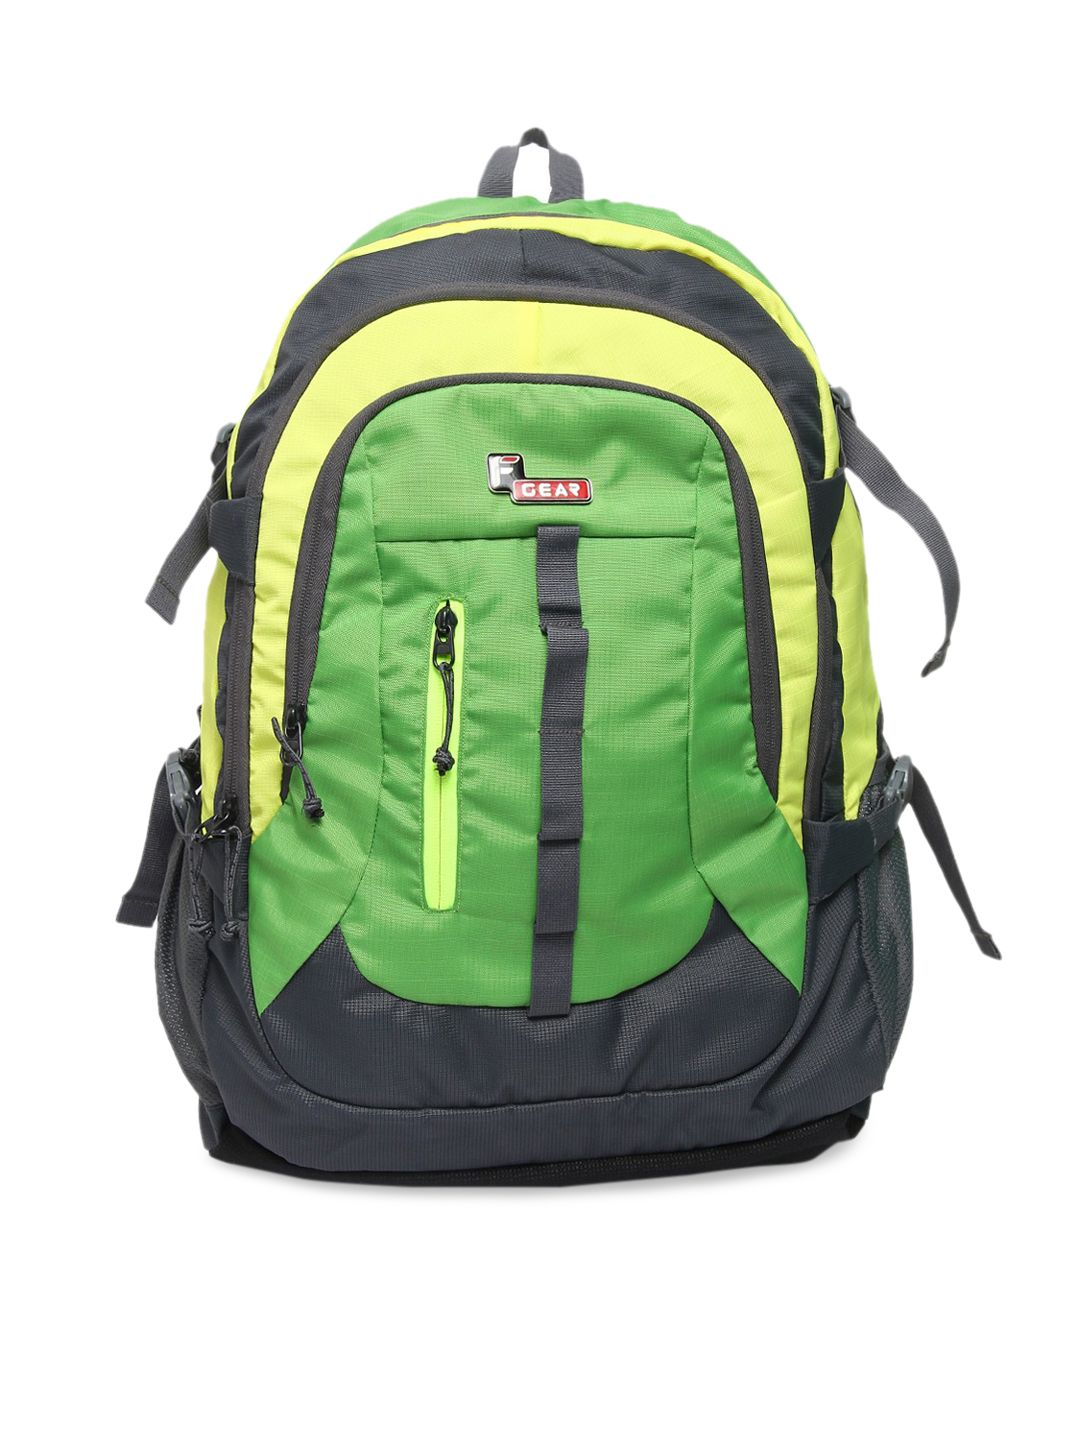 F Gear Unisex Grey & Green Colourblocked Backpacks with Compression Straps Price in India